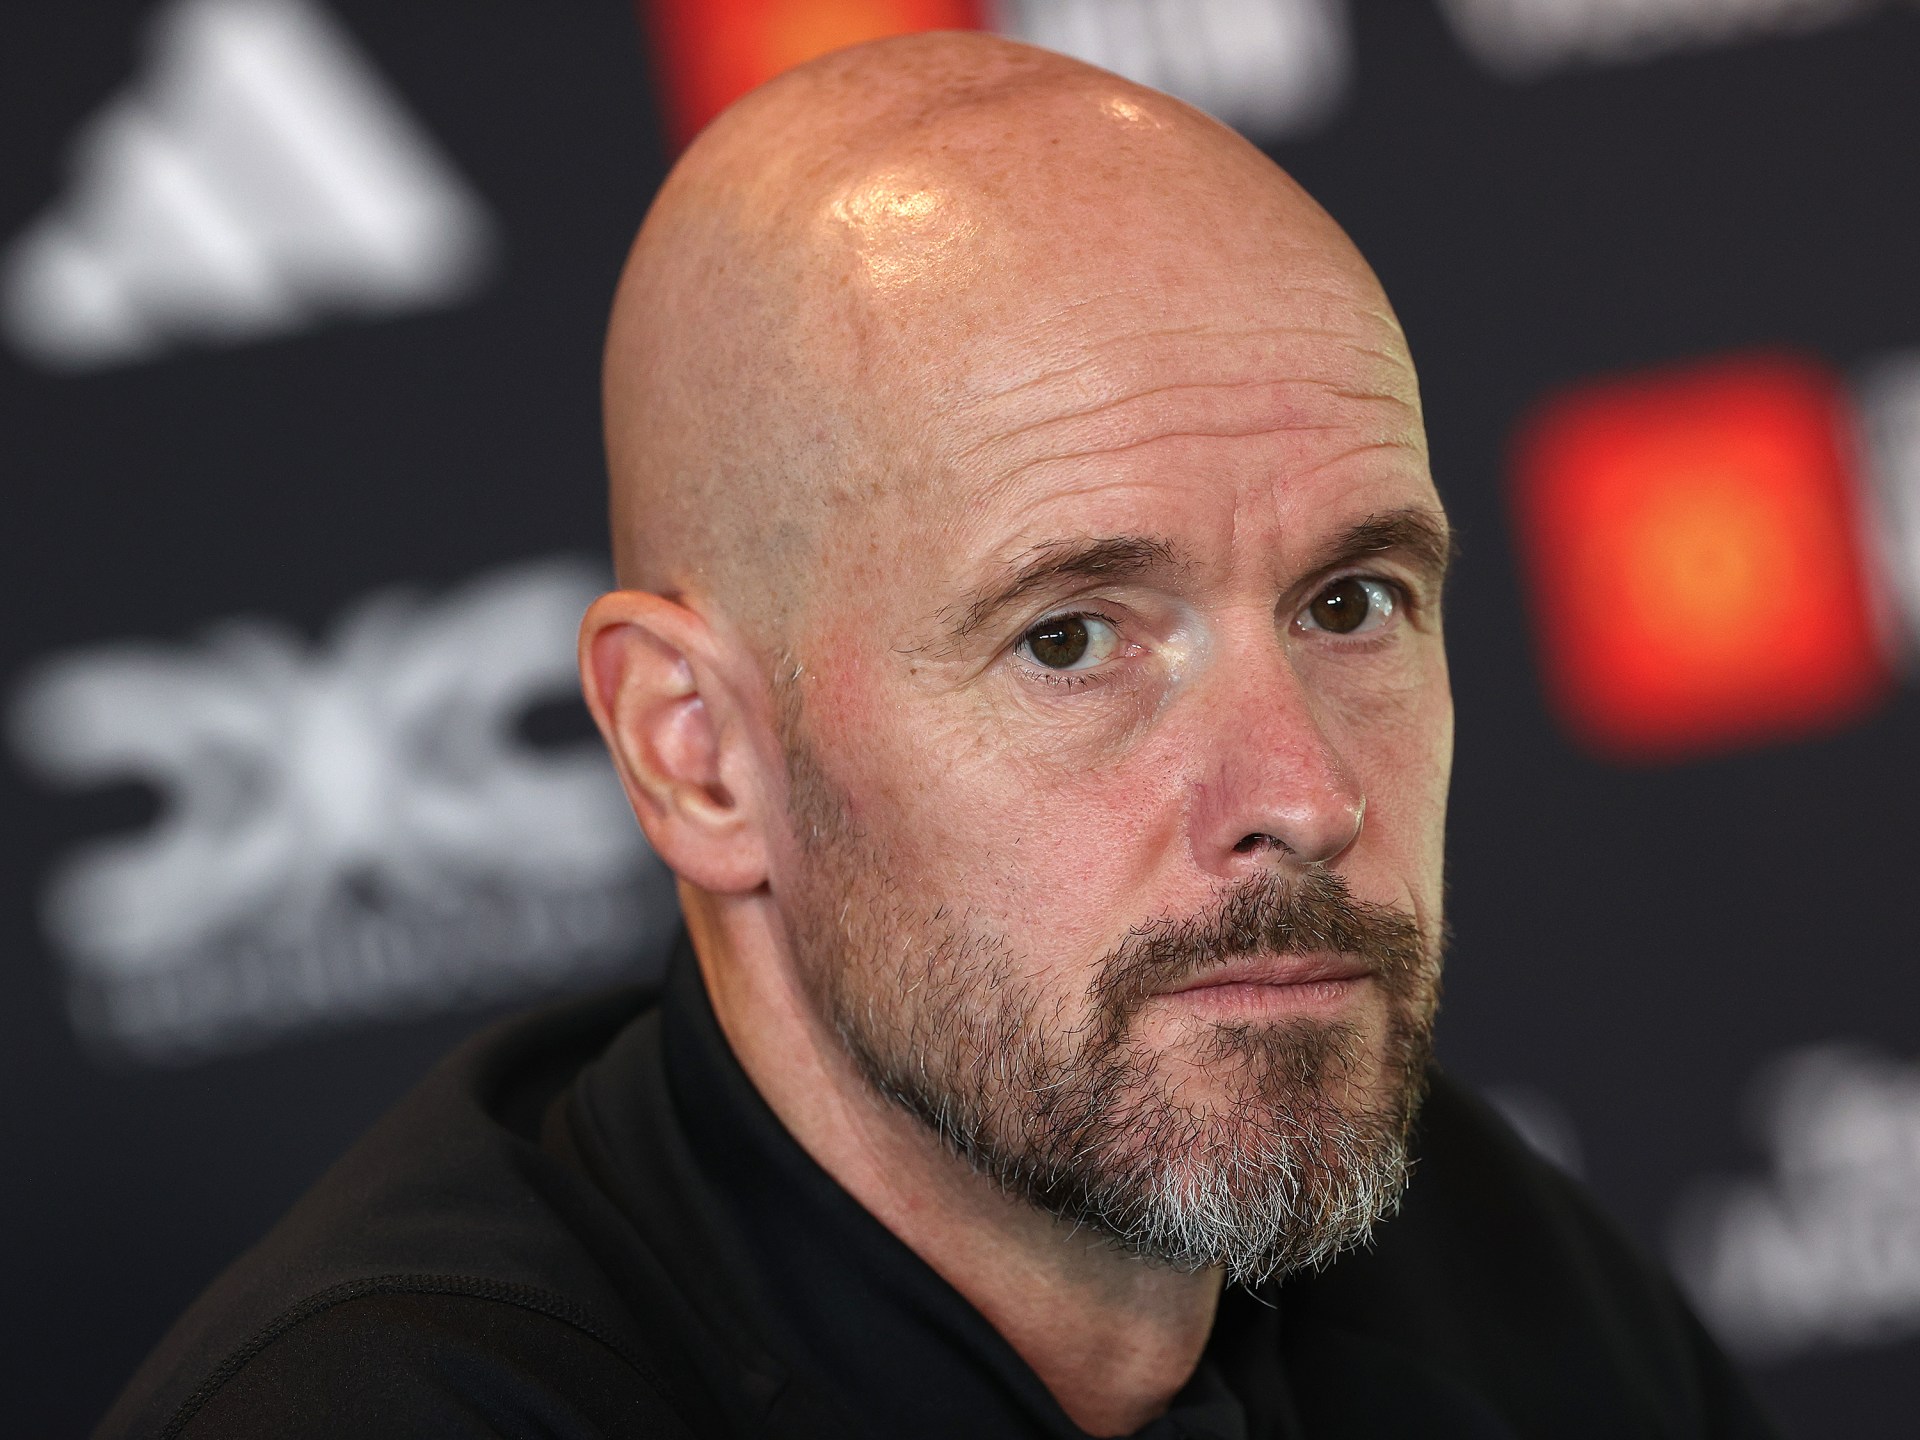 Ten Hag woes continue with Man Utd star ‘sidelined for two months’ from injury in five-minute cameo